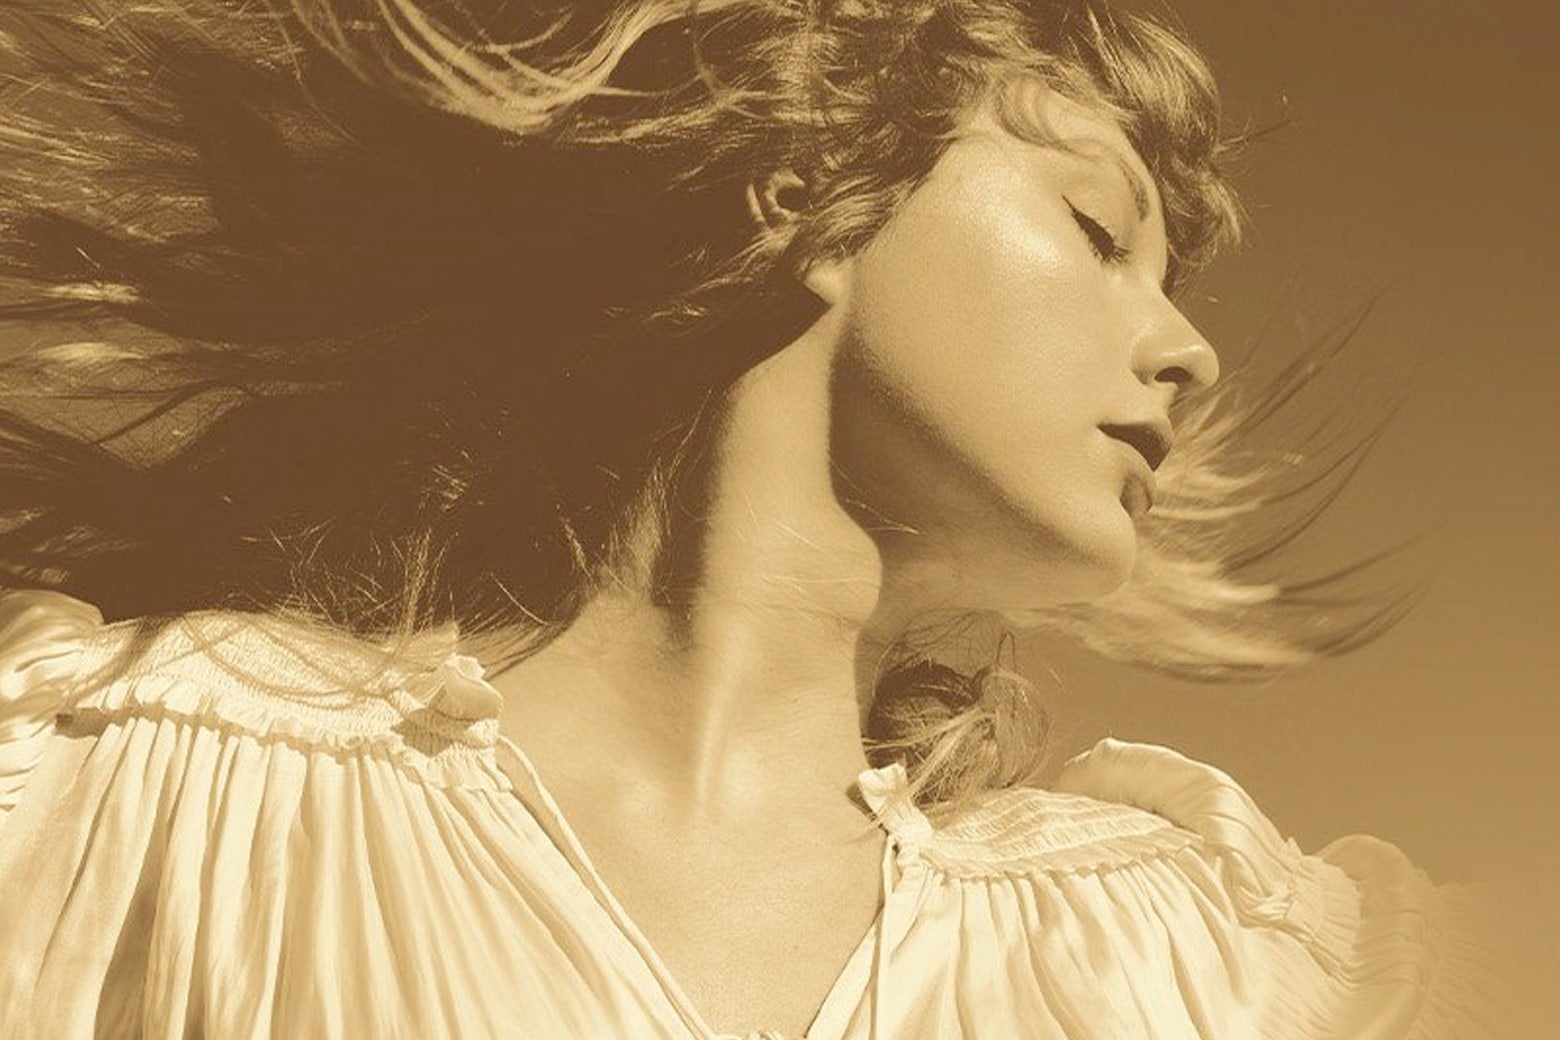 Sepia portrait of Taylor Swift with her face turned and hair blowing out